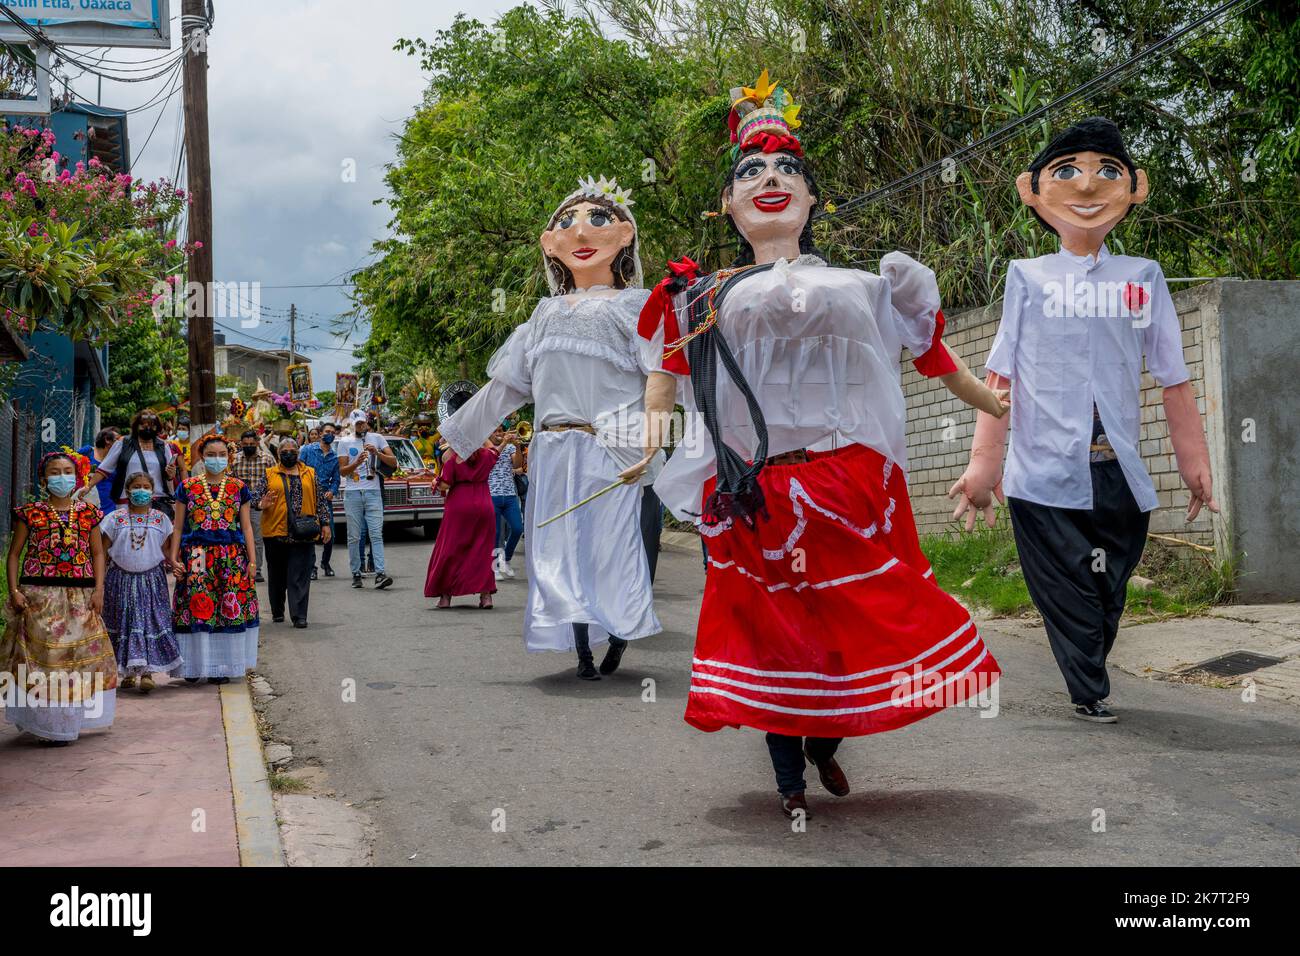 A wedding procession with Mojigangas (giant puppets) in the street of the small town of San Agustin Etla near Oaxaca, Mexico. Stock Photo